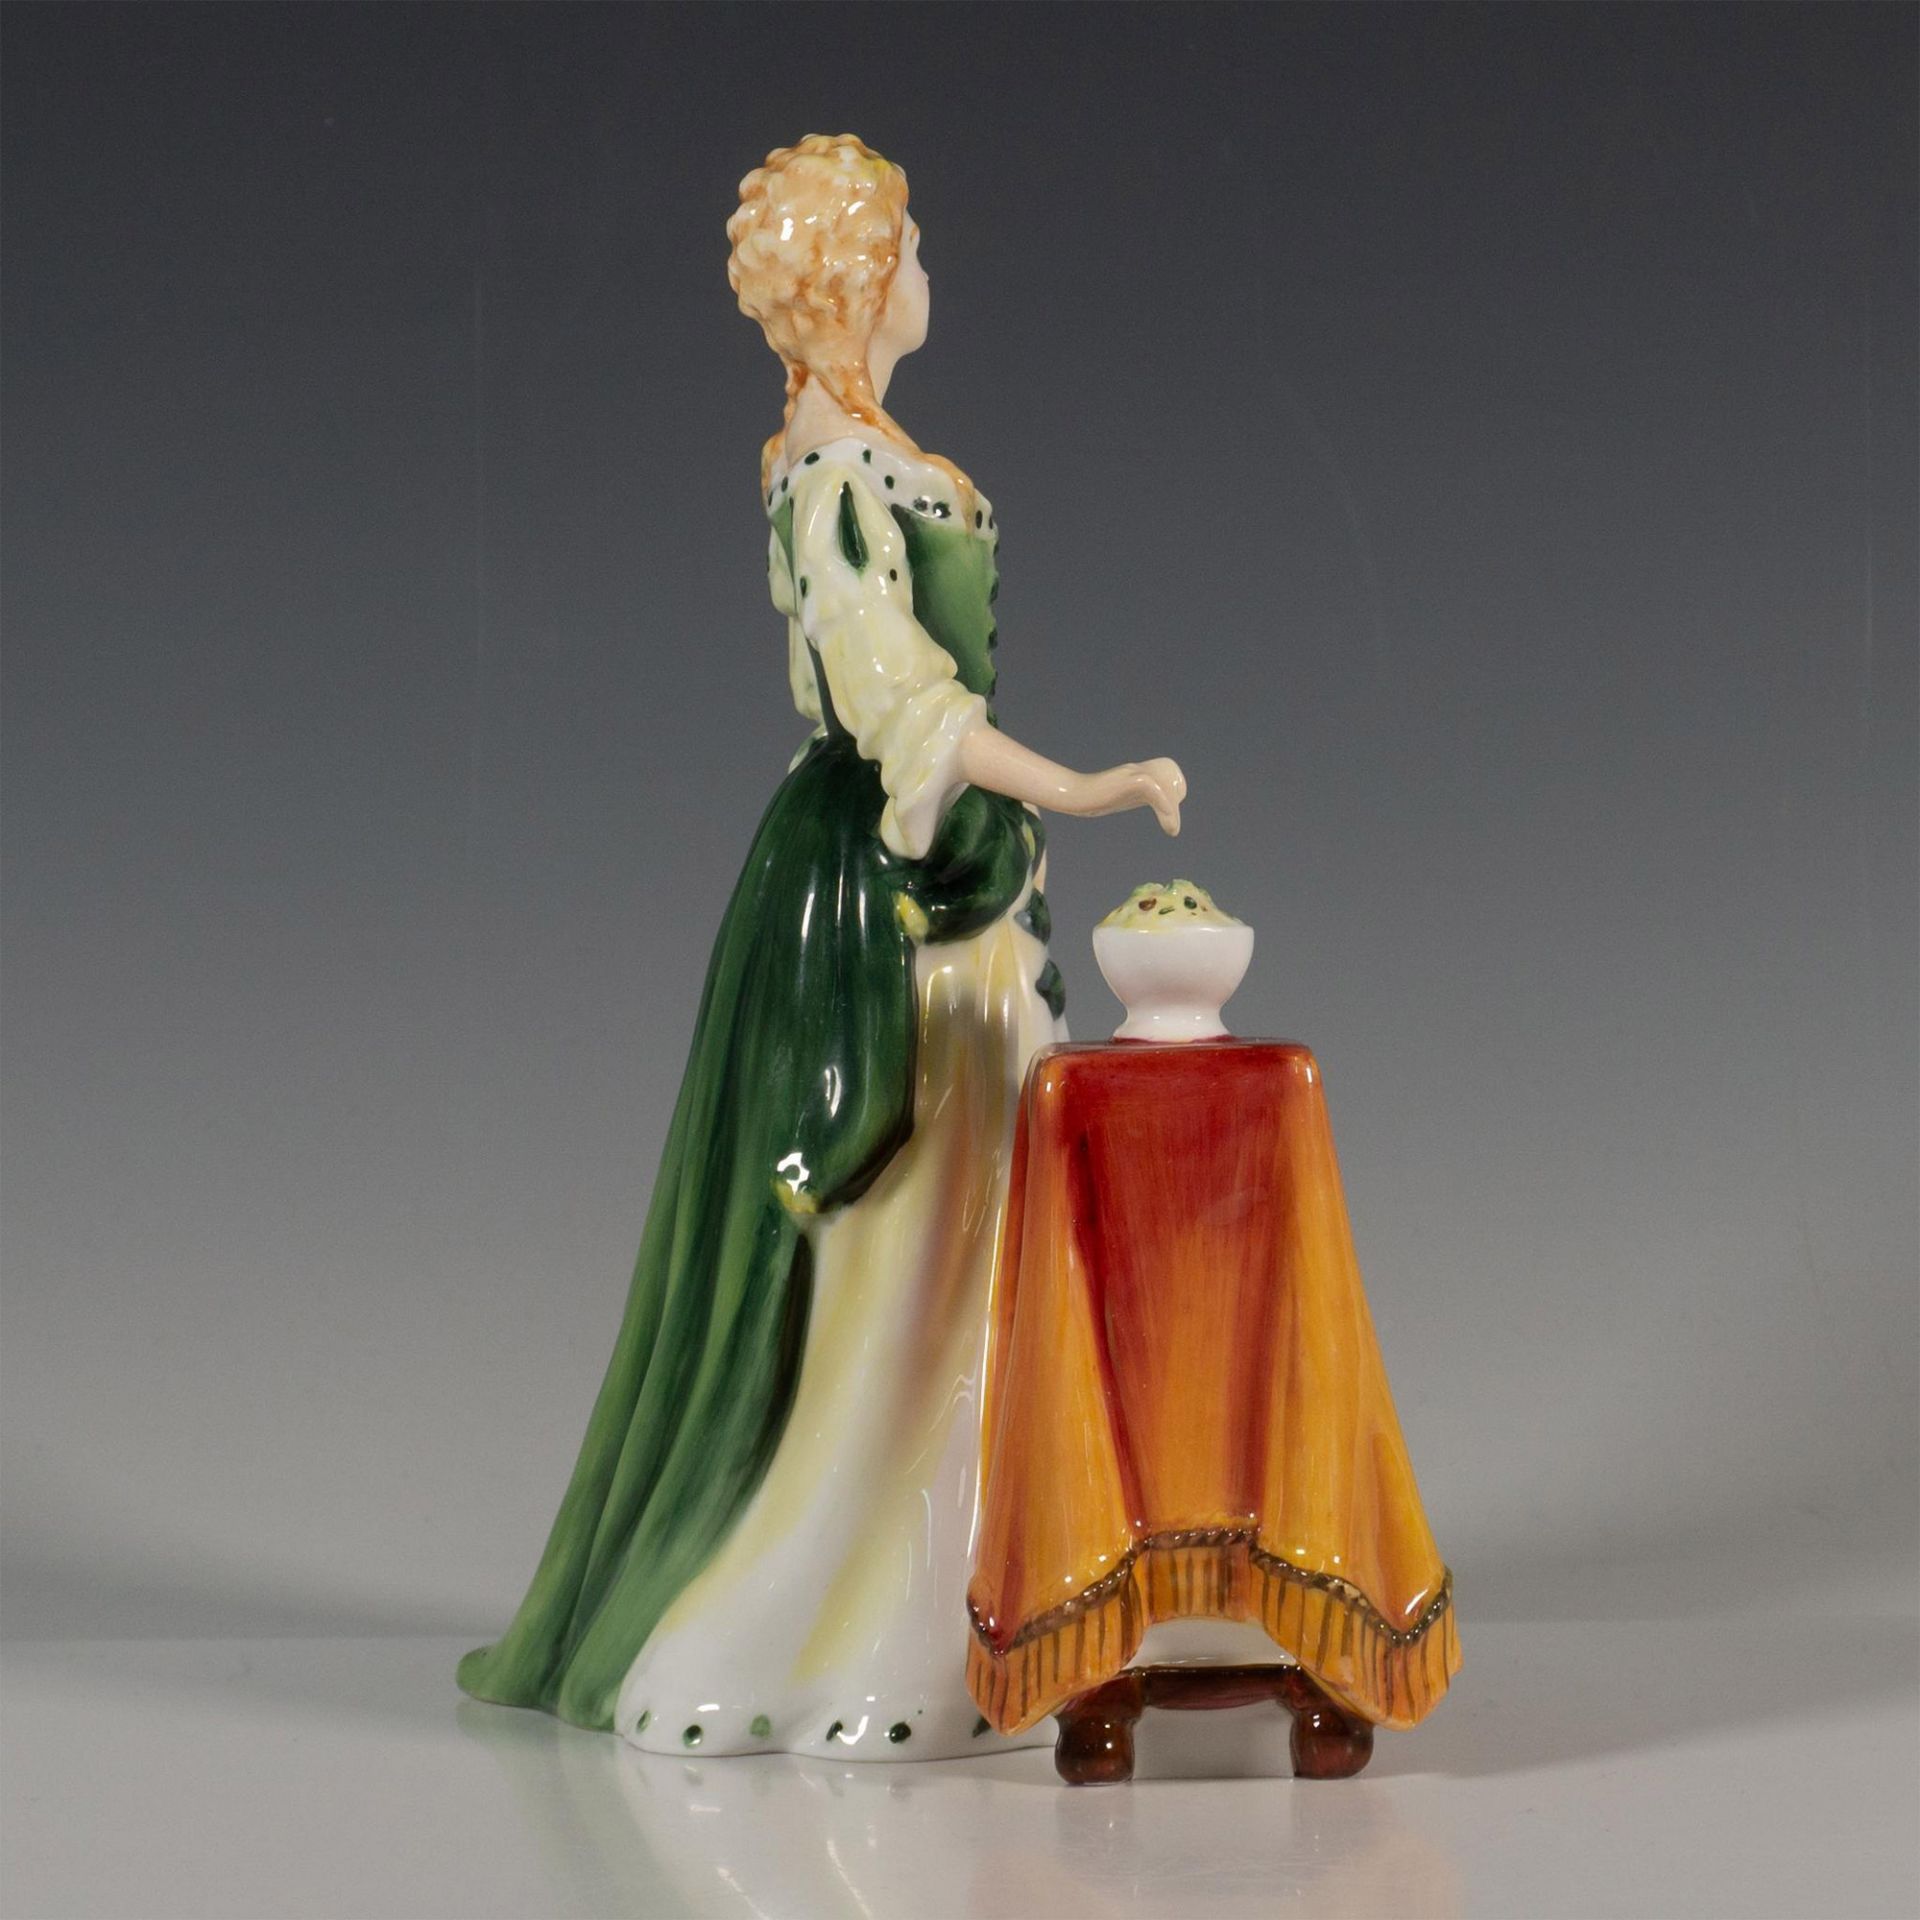 Queen Mary II HN4474 Prototype - Royal Doulton Figurine - Image 3 of 5